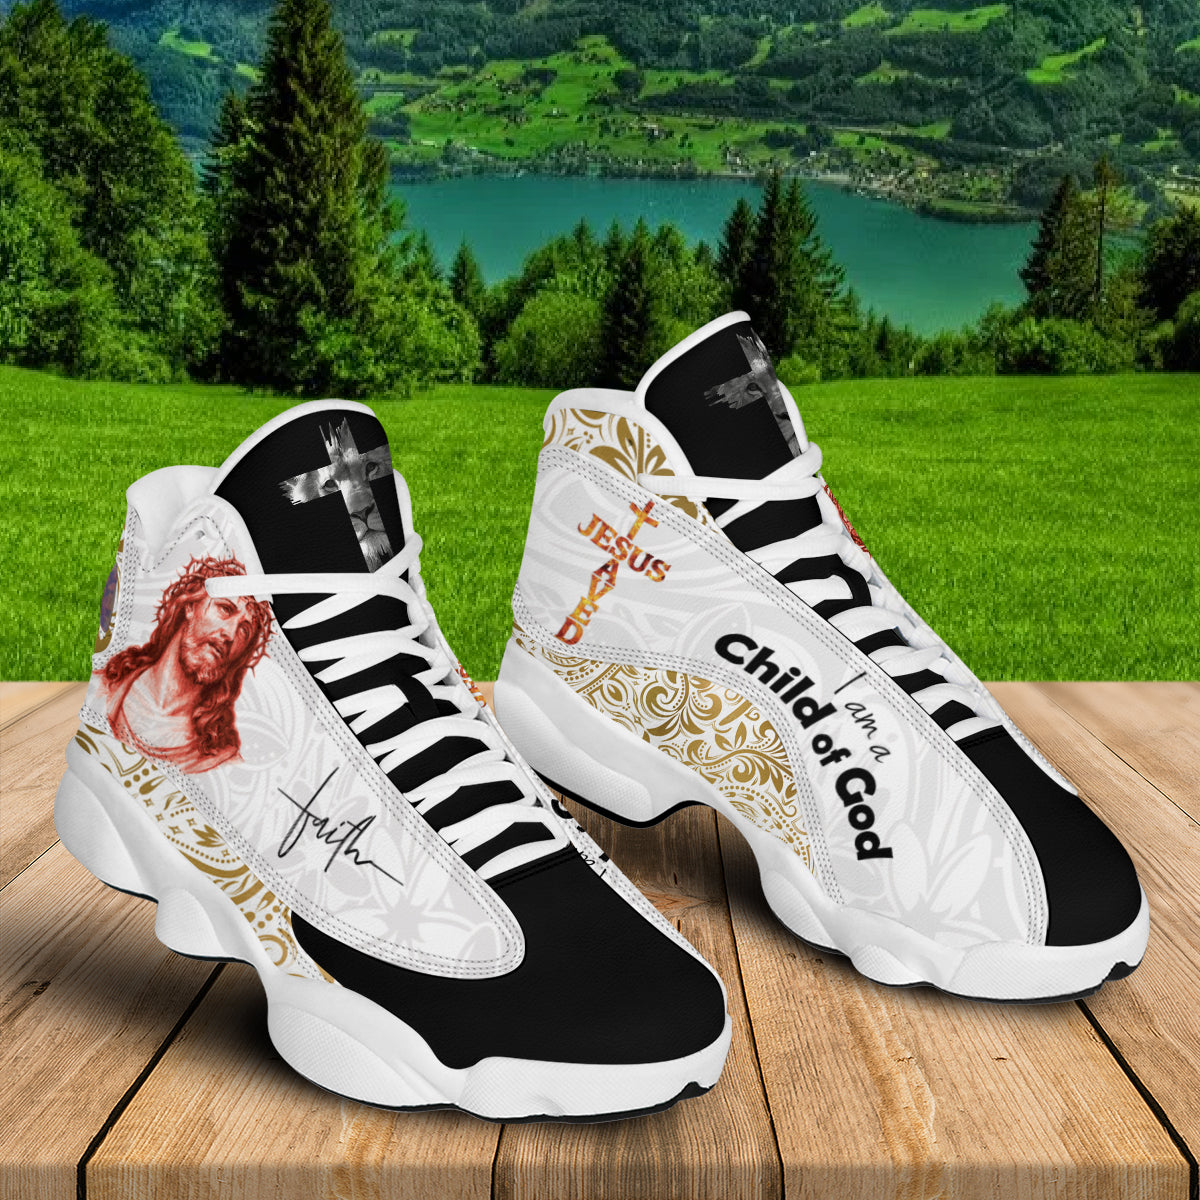 Teesdily | Jesus Saves Basketball Shoes, God Faith Child Of God Basketball Shoes, God Believer Gifts, Religious Street Footwear Unisex Basketball Shoes With Thick Soles